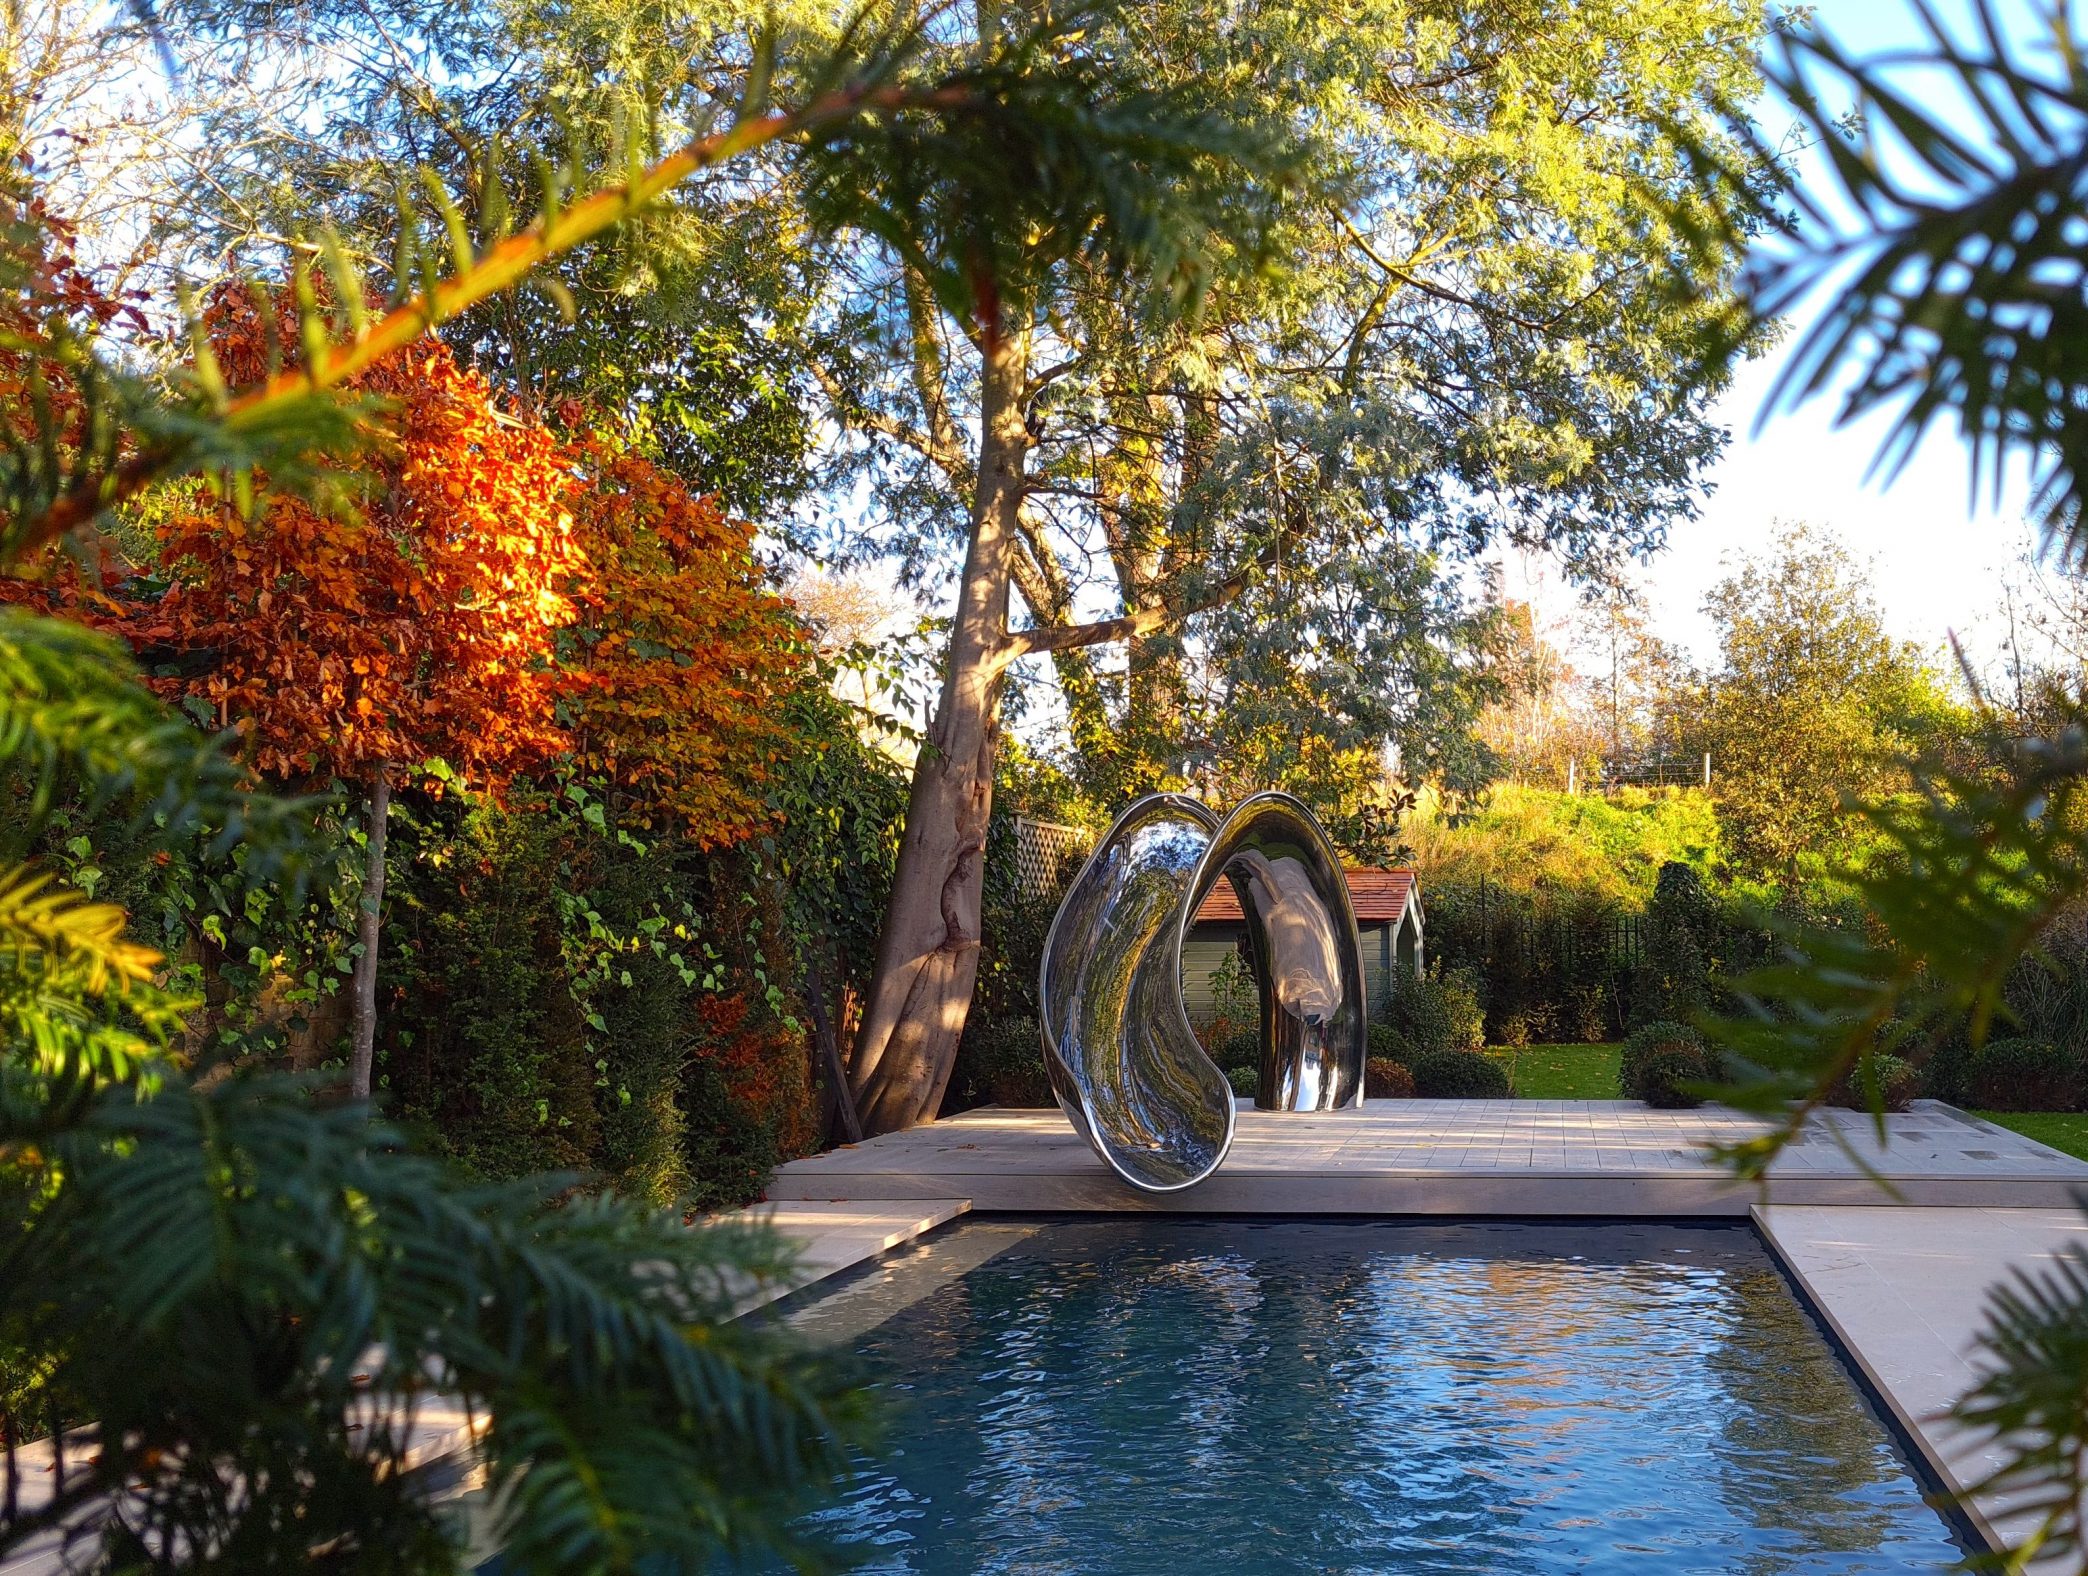 Sculptural stainless steel water slide, surronded by auntumnal trees